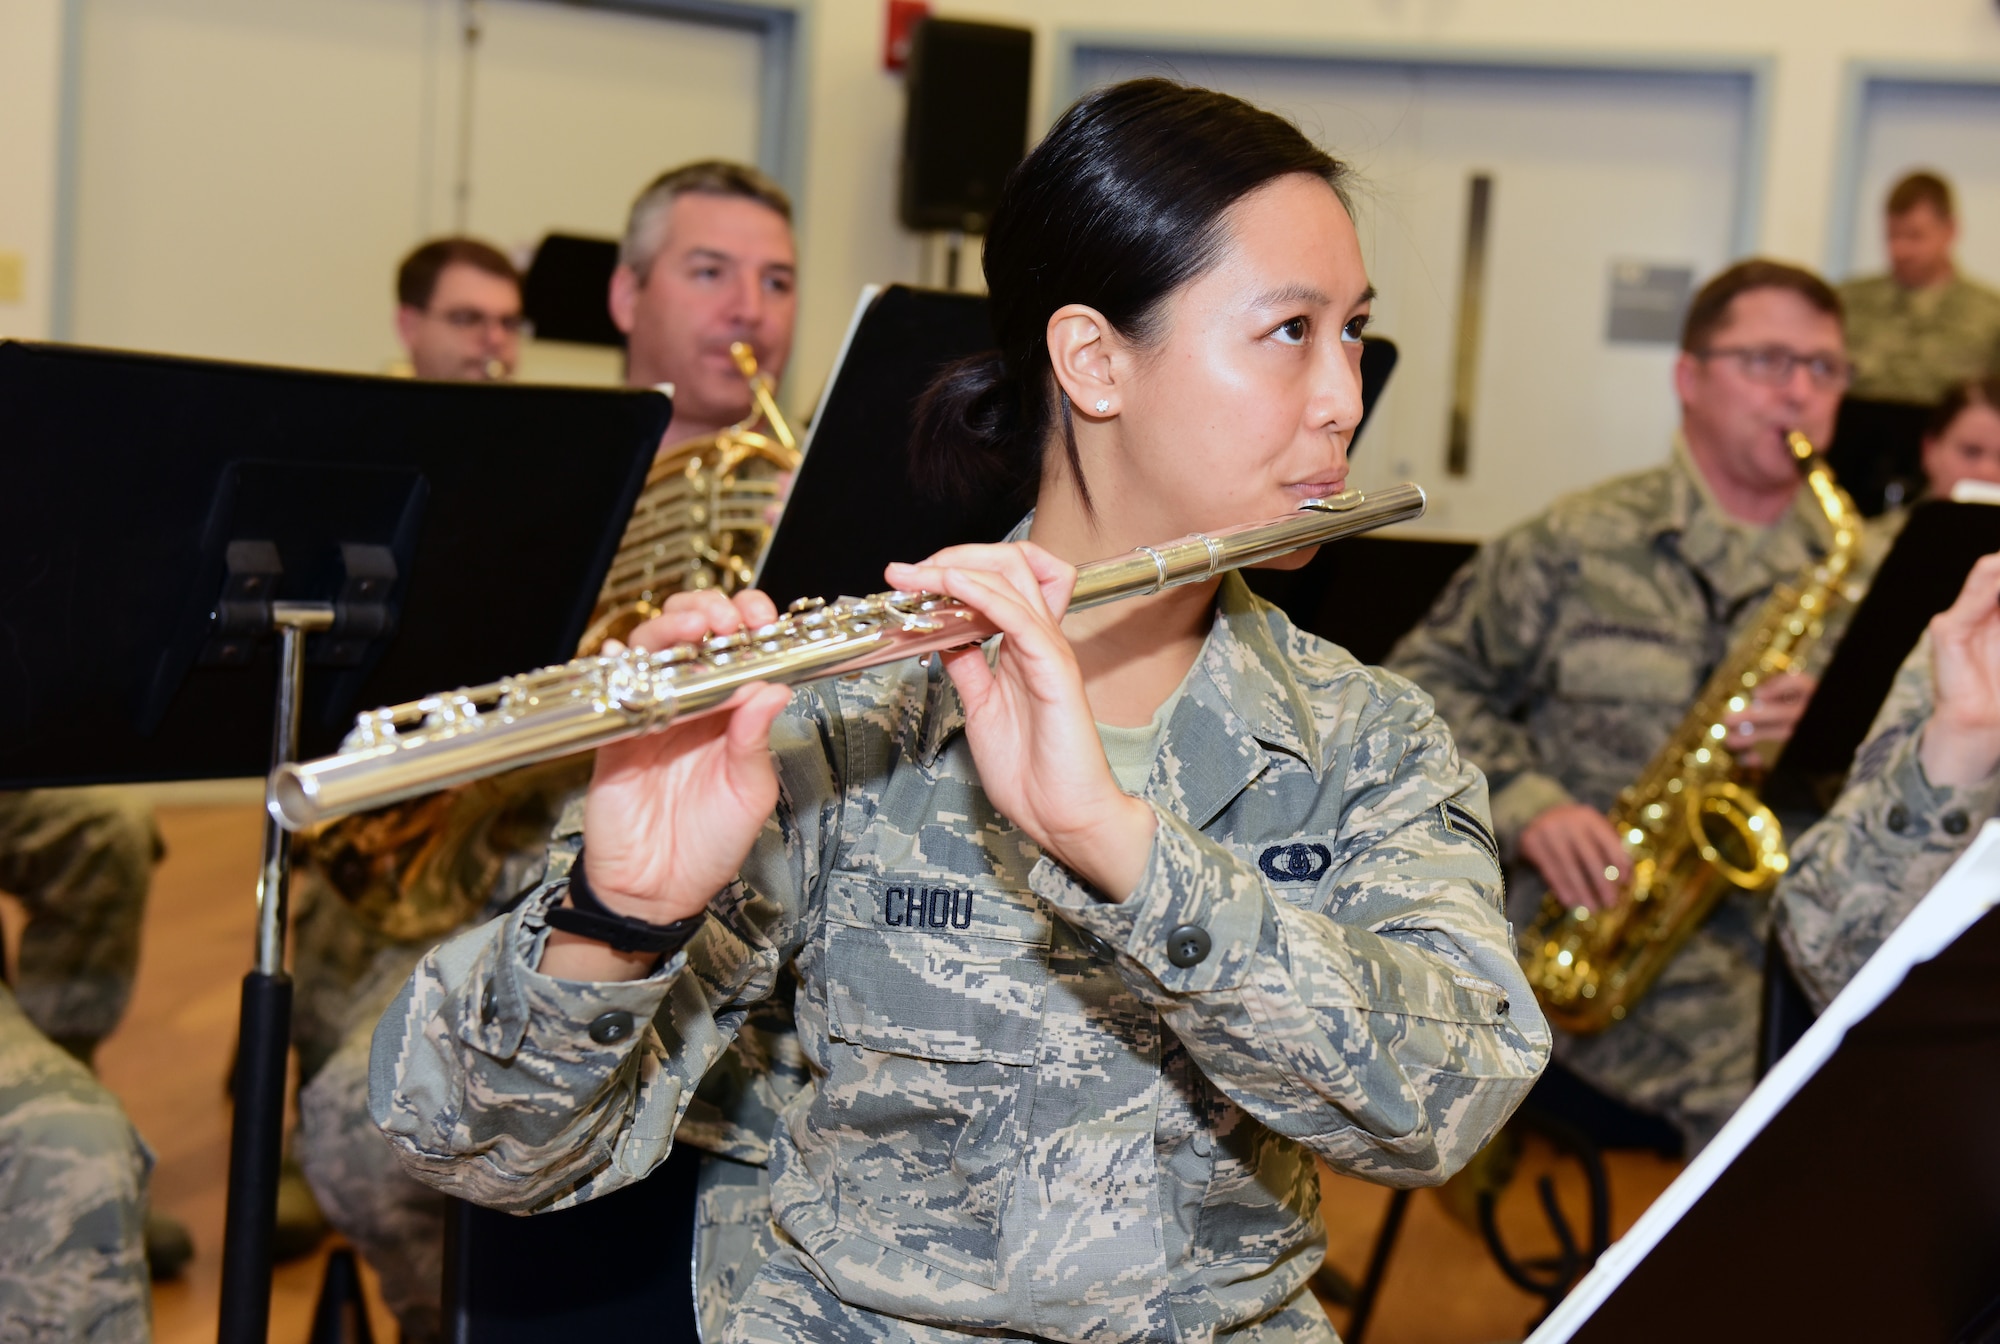 Airman 1st Class Stacey Chou, a flute player with the Air National Guard Band of the Northeast, rehearses Nov. 17, 2018, for the band’s upcoming annual holiday concert. The band has been preparing and practicing for the concert since mid-summer. The holiday concert is scheduled for Dec. 16 at the Auditorium of the Scottish Rite Cathedral, Harrisburg, Pennsylvania, at 3 p.m. and is free to the public. (U.S. Air National Guard photo by Tech. Sgt. Claire Behney/Released)